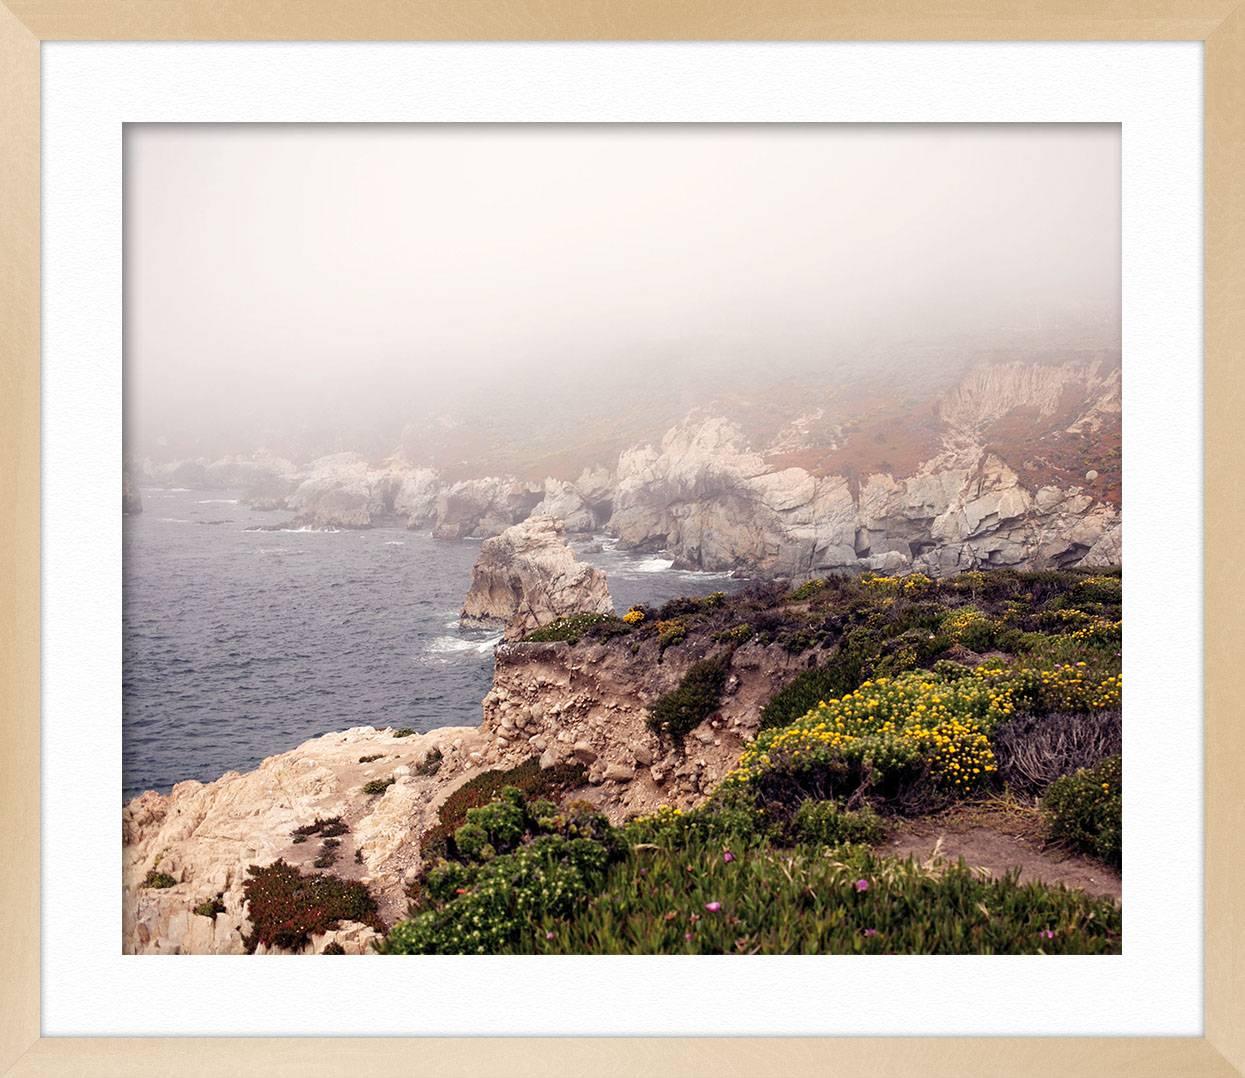 ABOUT THIS PIECE: The series “Big Sur” is part of my work on America. I traveled through the US in April and May of 2013 to explore the American Myth. The magic and beauty of Big Sur was breathtaking Markus Burke is a photographer fascinated by